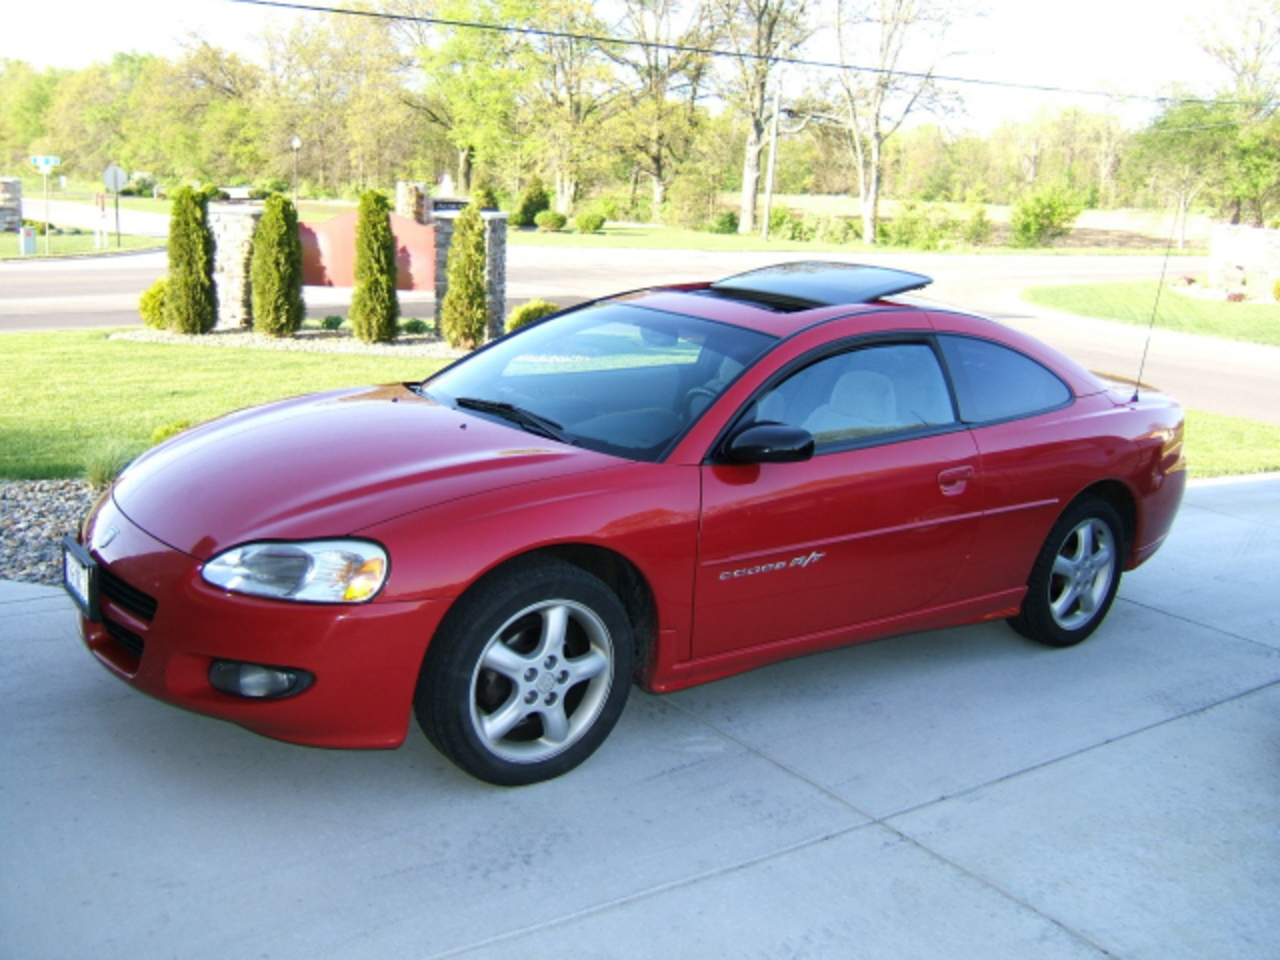 dodge stratus related images,51 to 100 - Zuoda Images